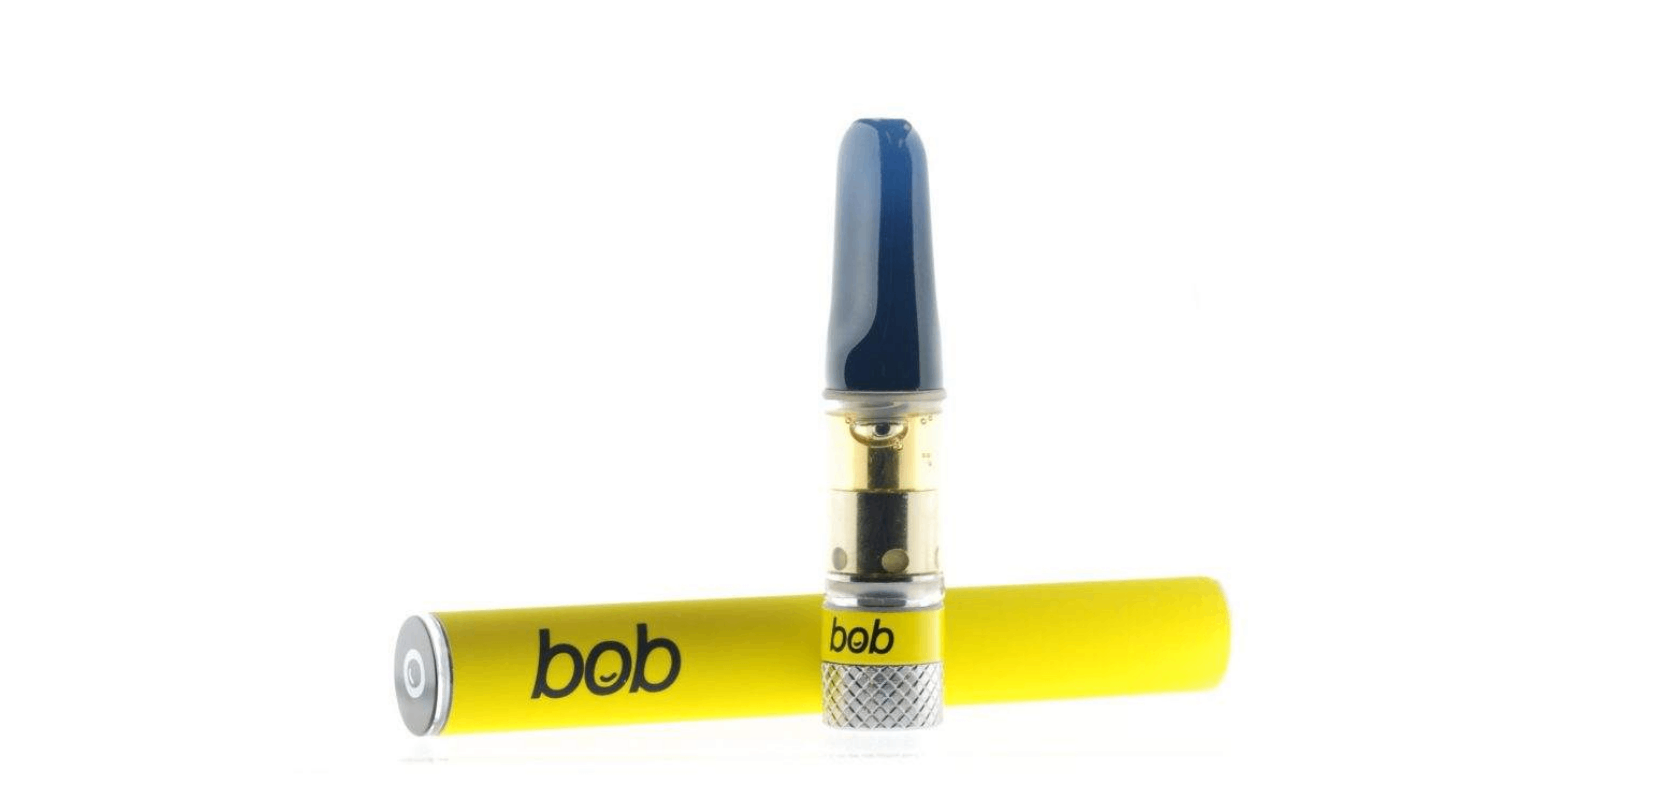 Are you on the lookout for the best vape kits? Bob has your back. The Bob Vape Kits (Keyy) include: